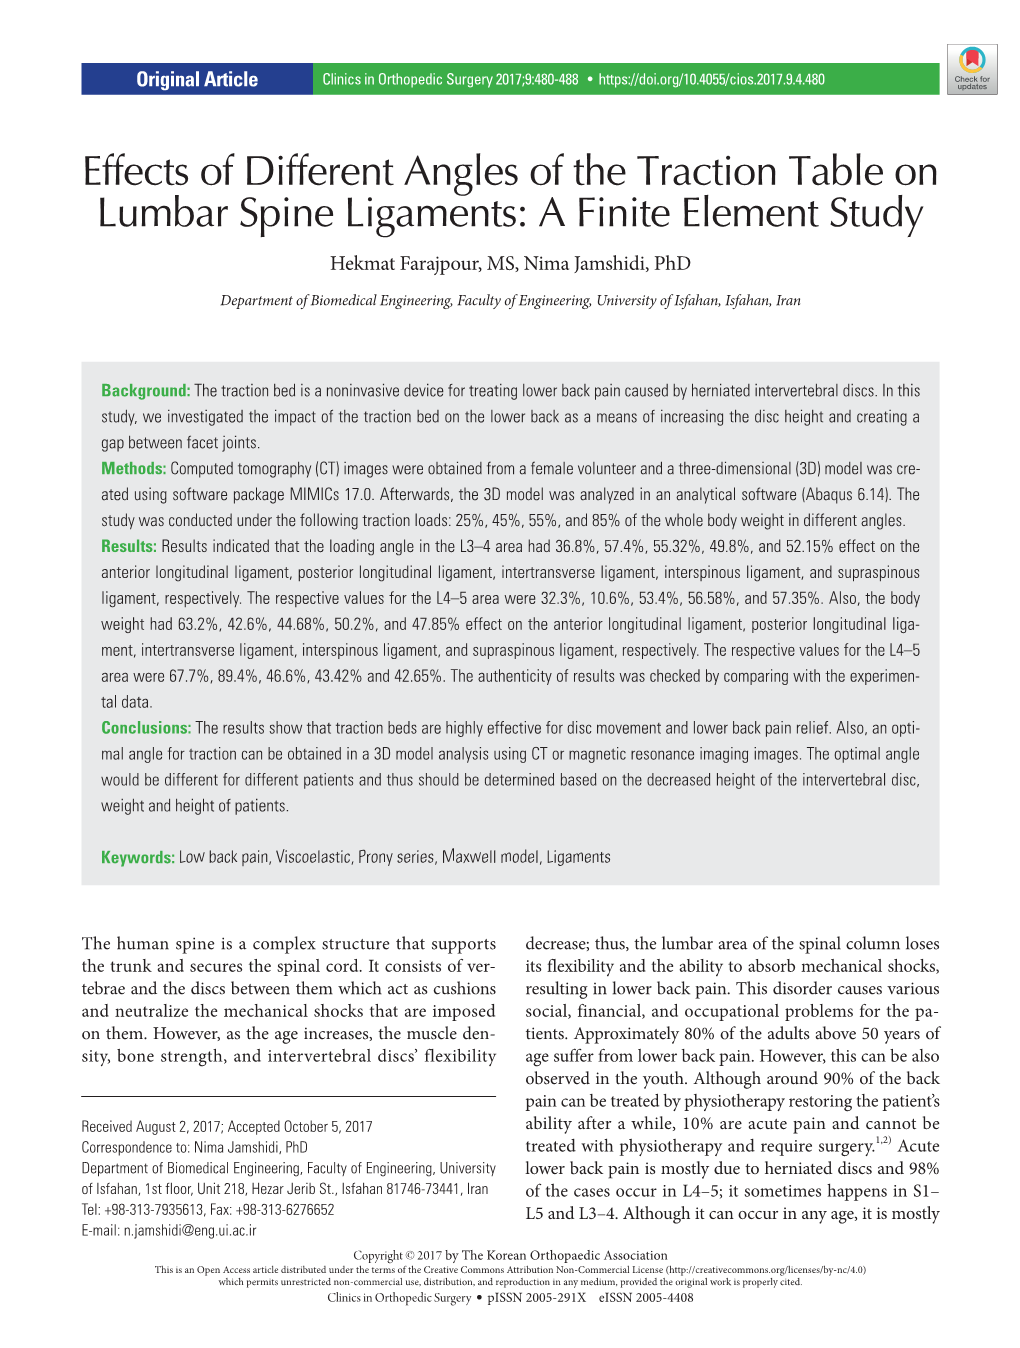 Effects of Different Angles of the Traction Table on Lumbar Spine Ligaments: a Finite Element Study Hekmat Farajpour, MS, Nima Jamshidi, Phd